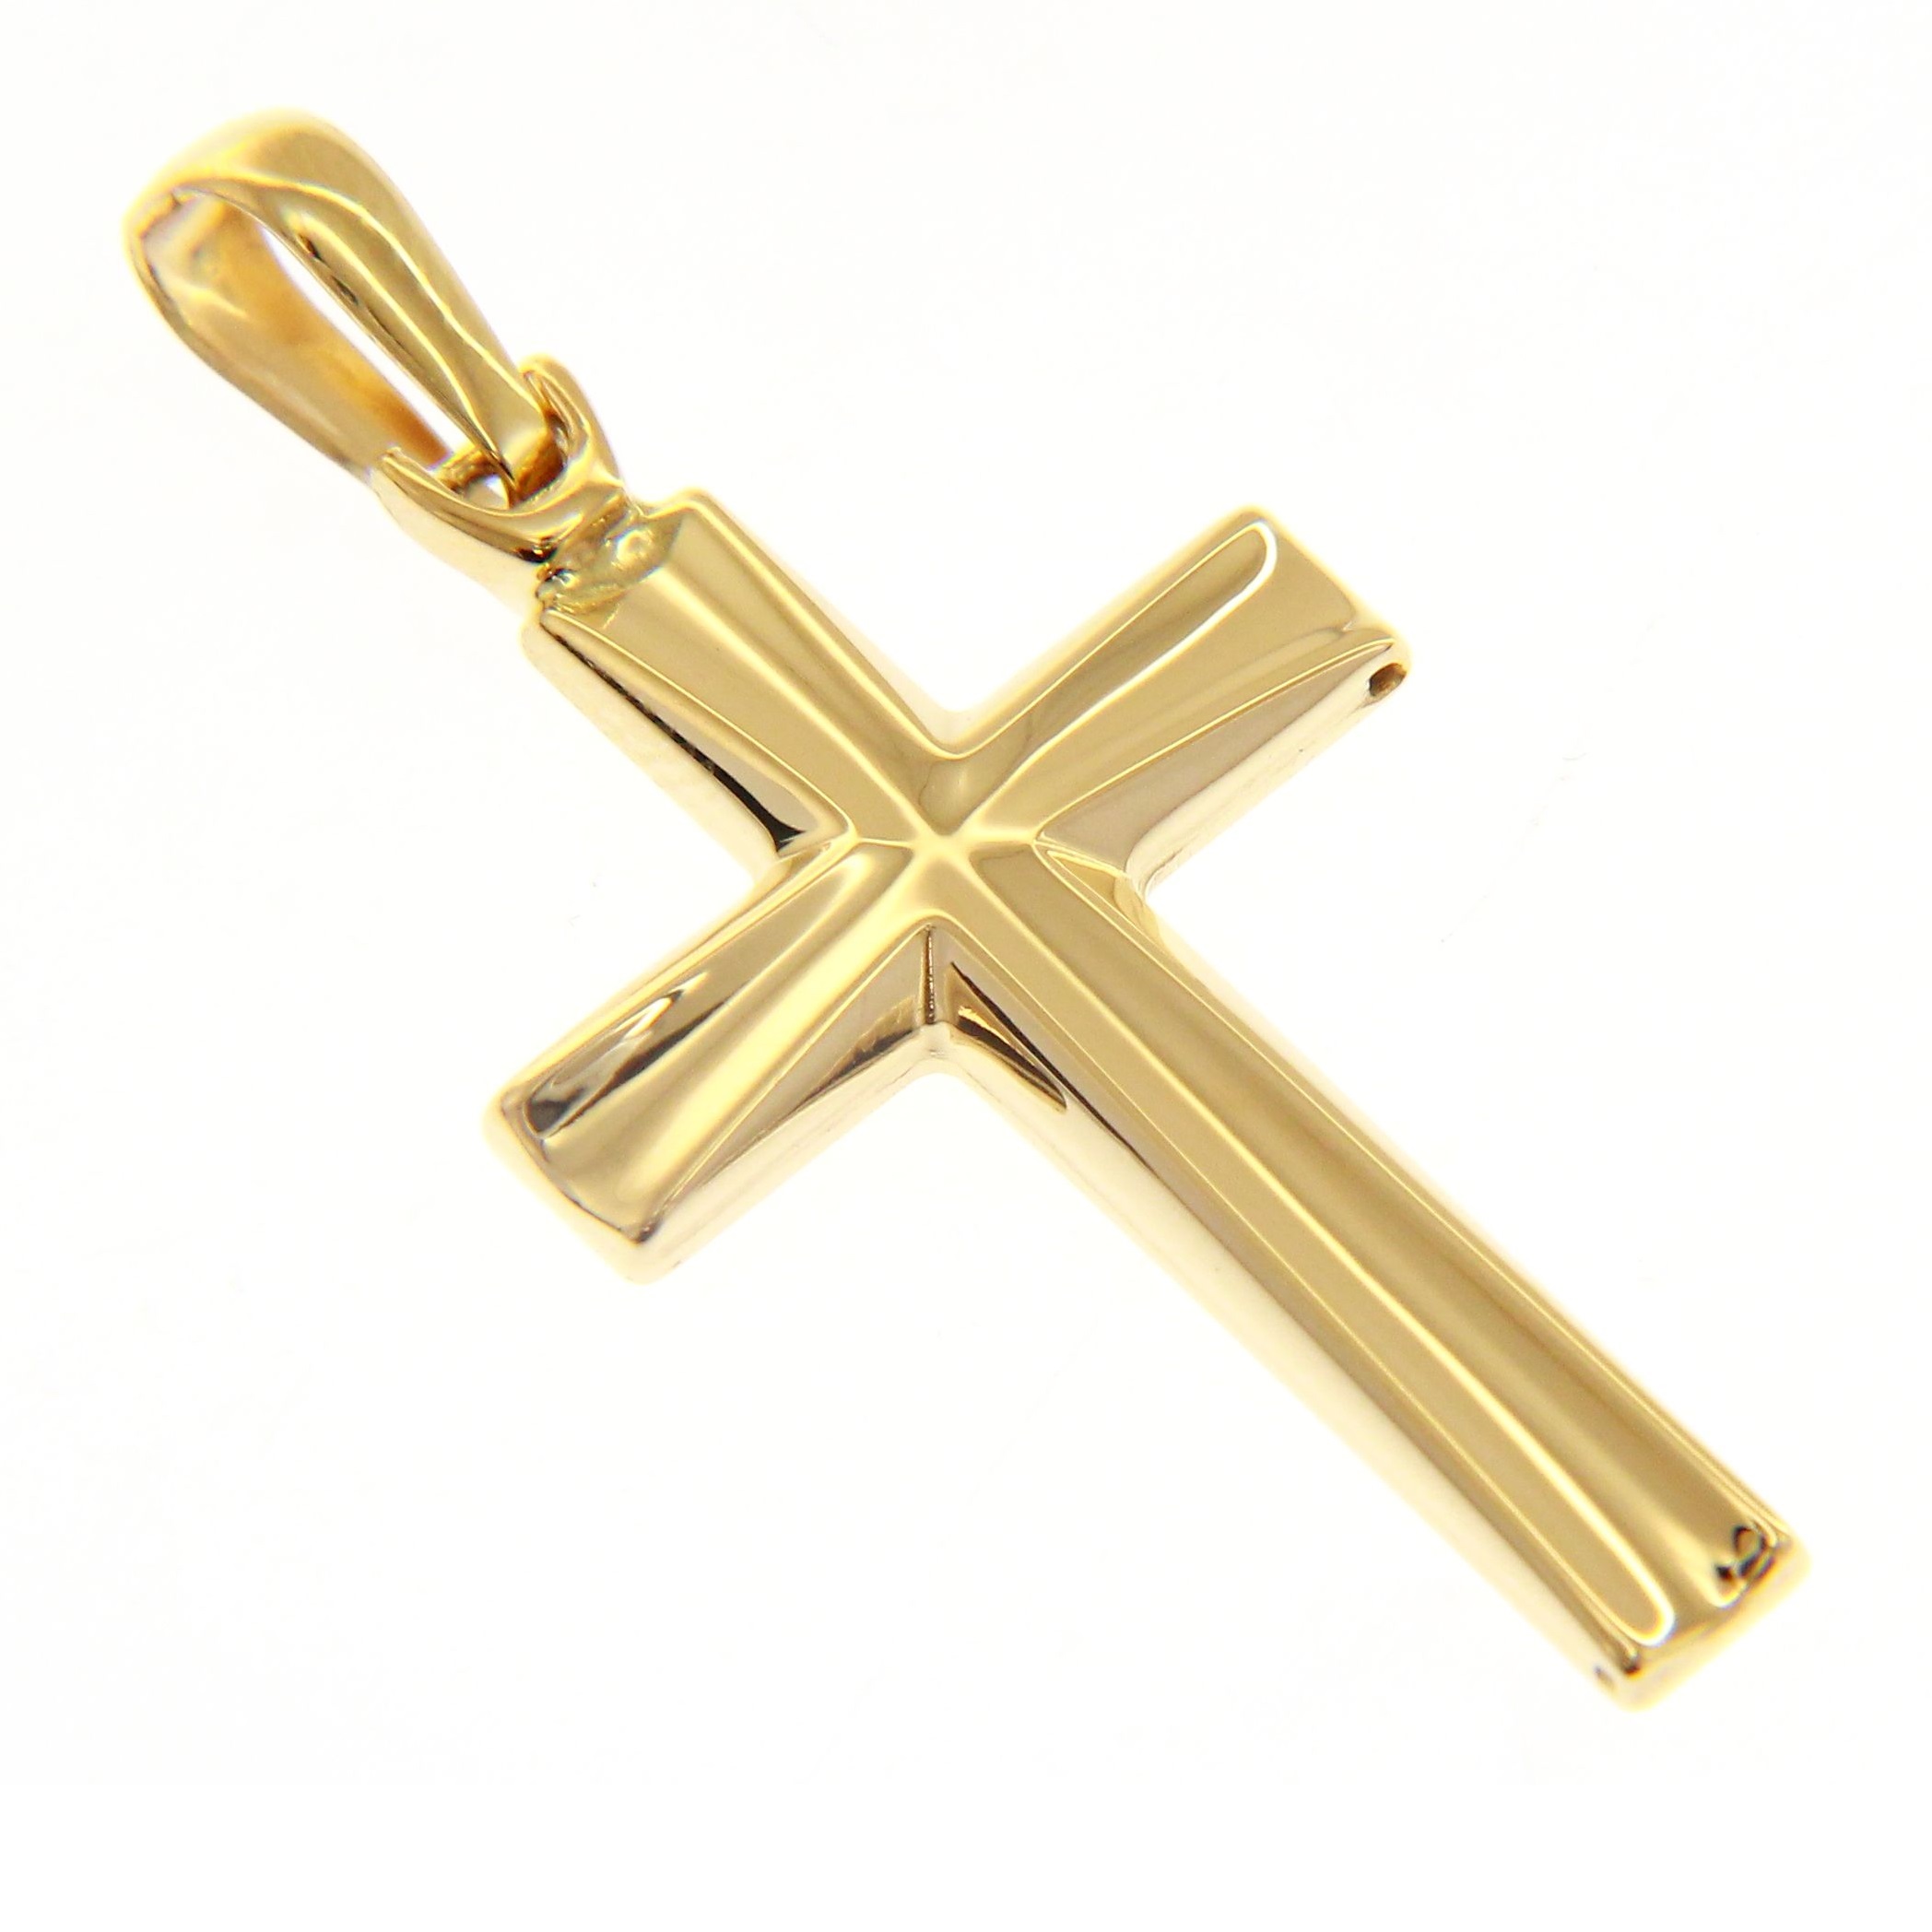 At Auction: A vintage Italian 18ct gold crucifix pendant, total L: 40mm x  20mm, 2.2g